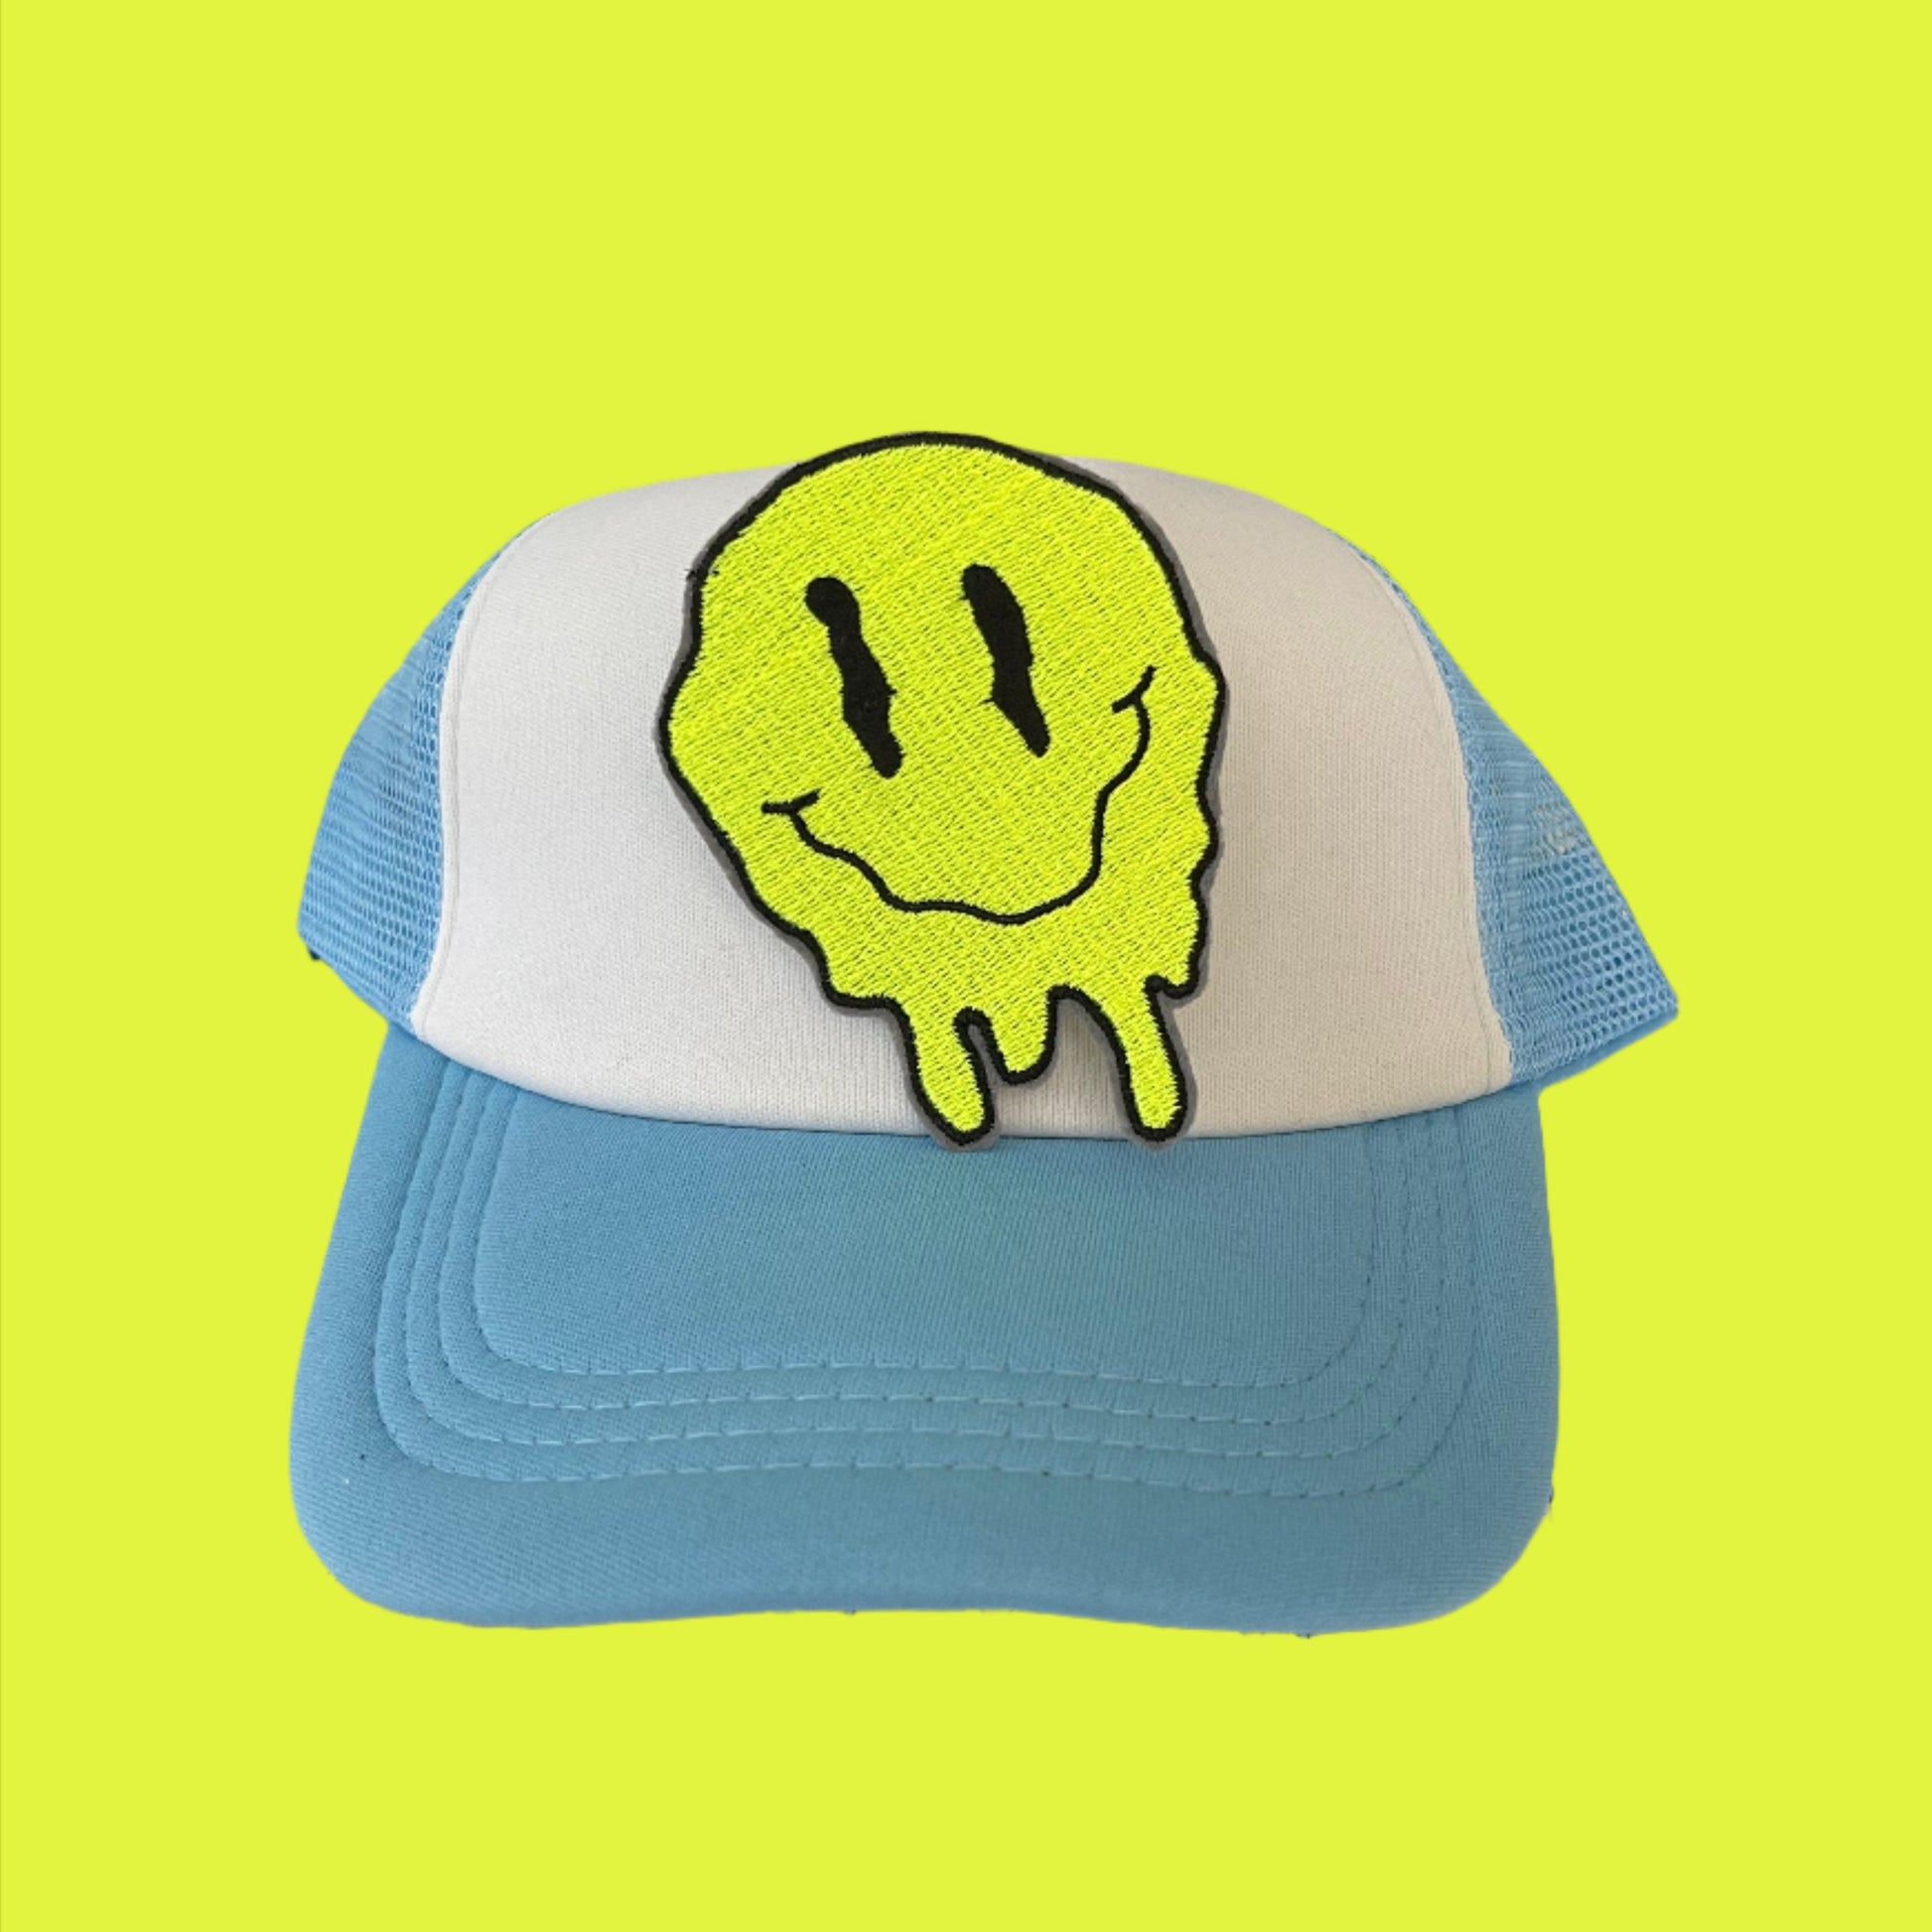 Bright yellow iron-on patch featuring a melting smiley face design, showcasing an edgy and fun retro aesthetic.